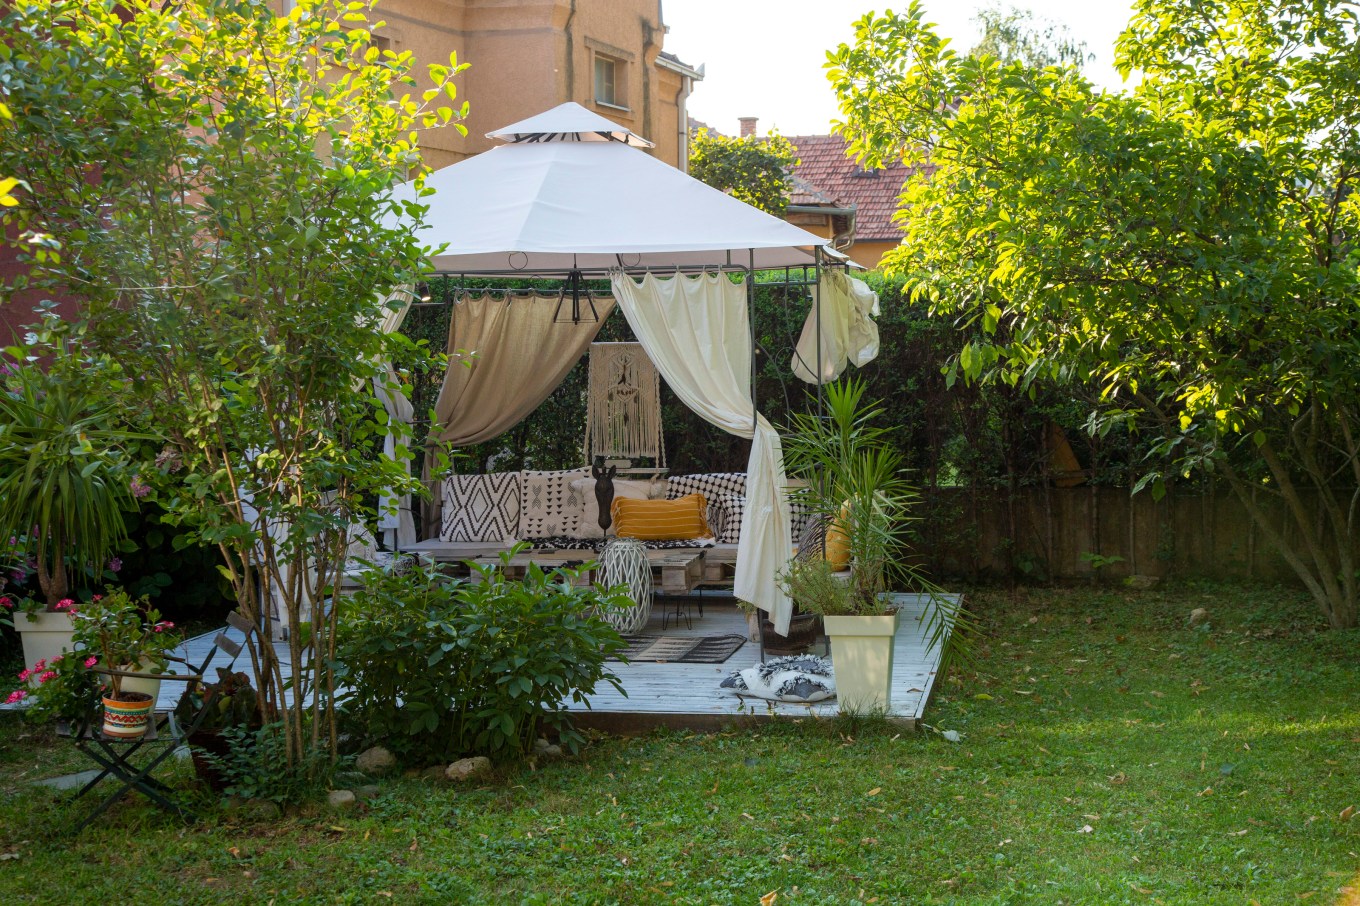 Beautiful cozy gazebo with fabric curtains in the backyard surrounded with trees, flowers, lawn and fence